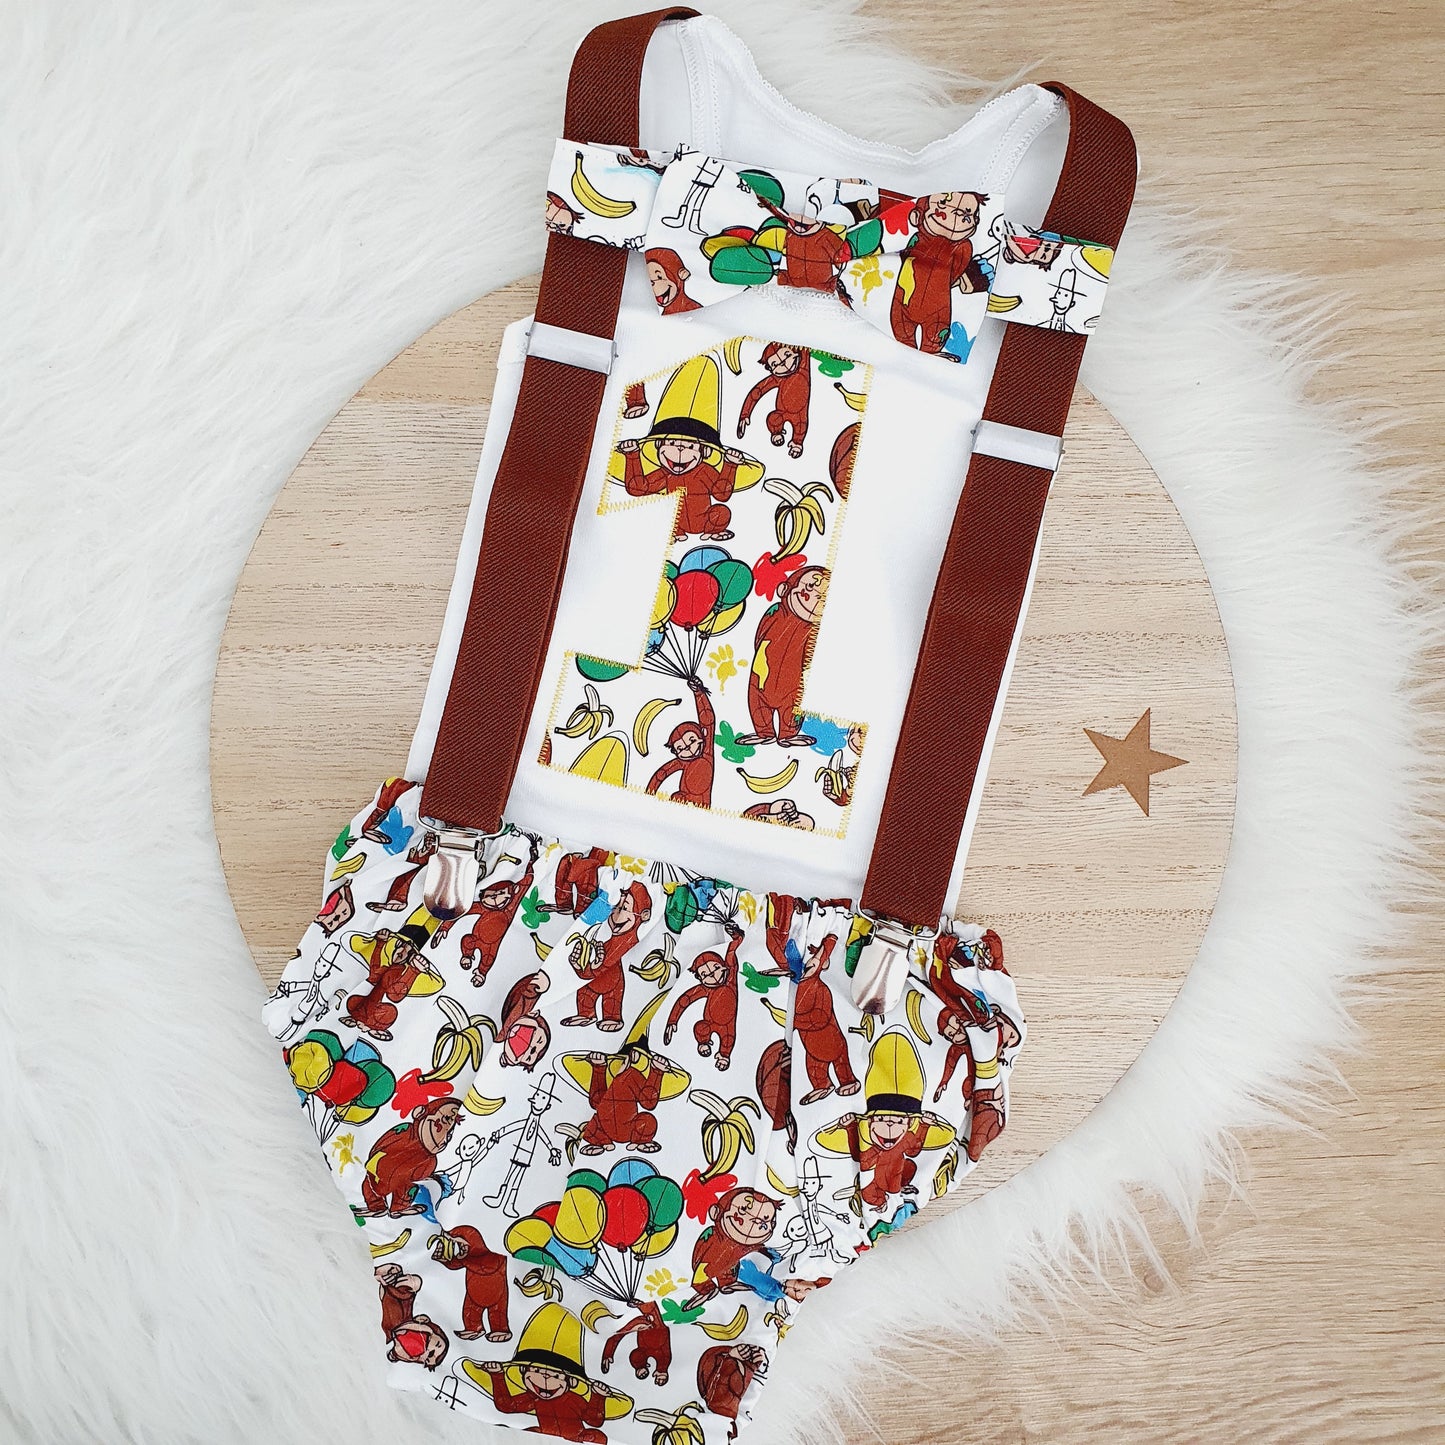 Curious George print Boys 1st Birthday - Cake Smash Outfit - Size 0, Nappy Cover, Tie, Singlet & Suspenders Set, CURIOUS MONKEY print